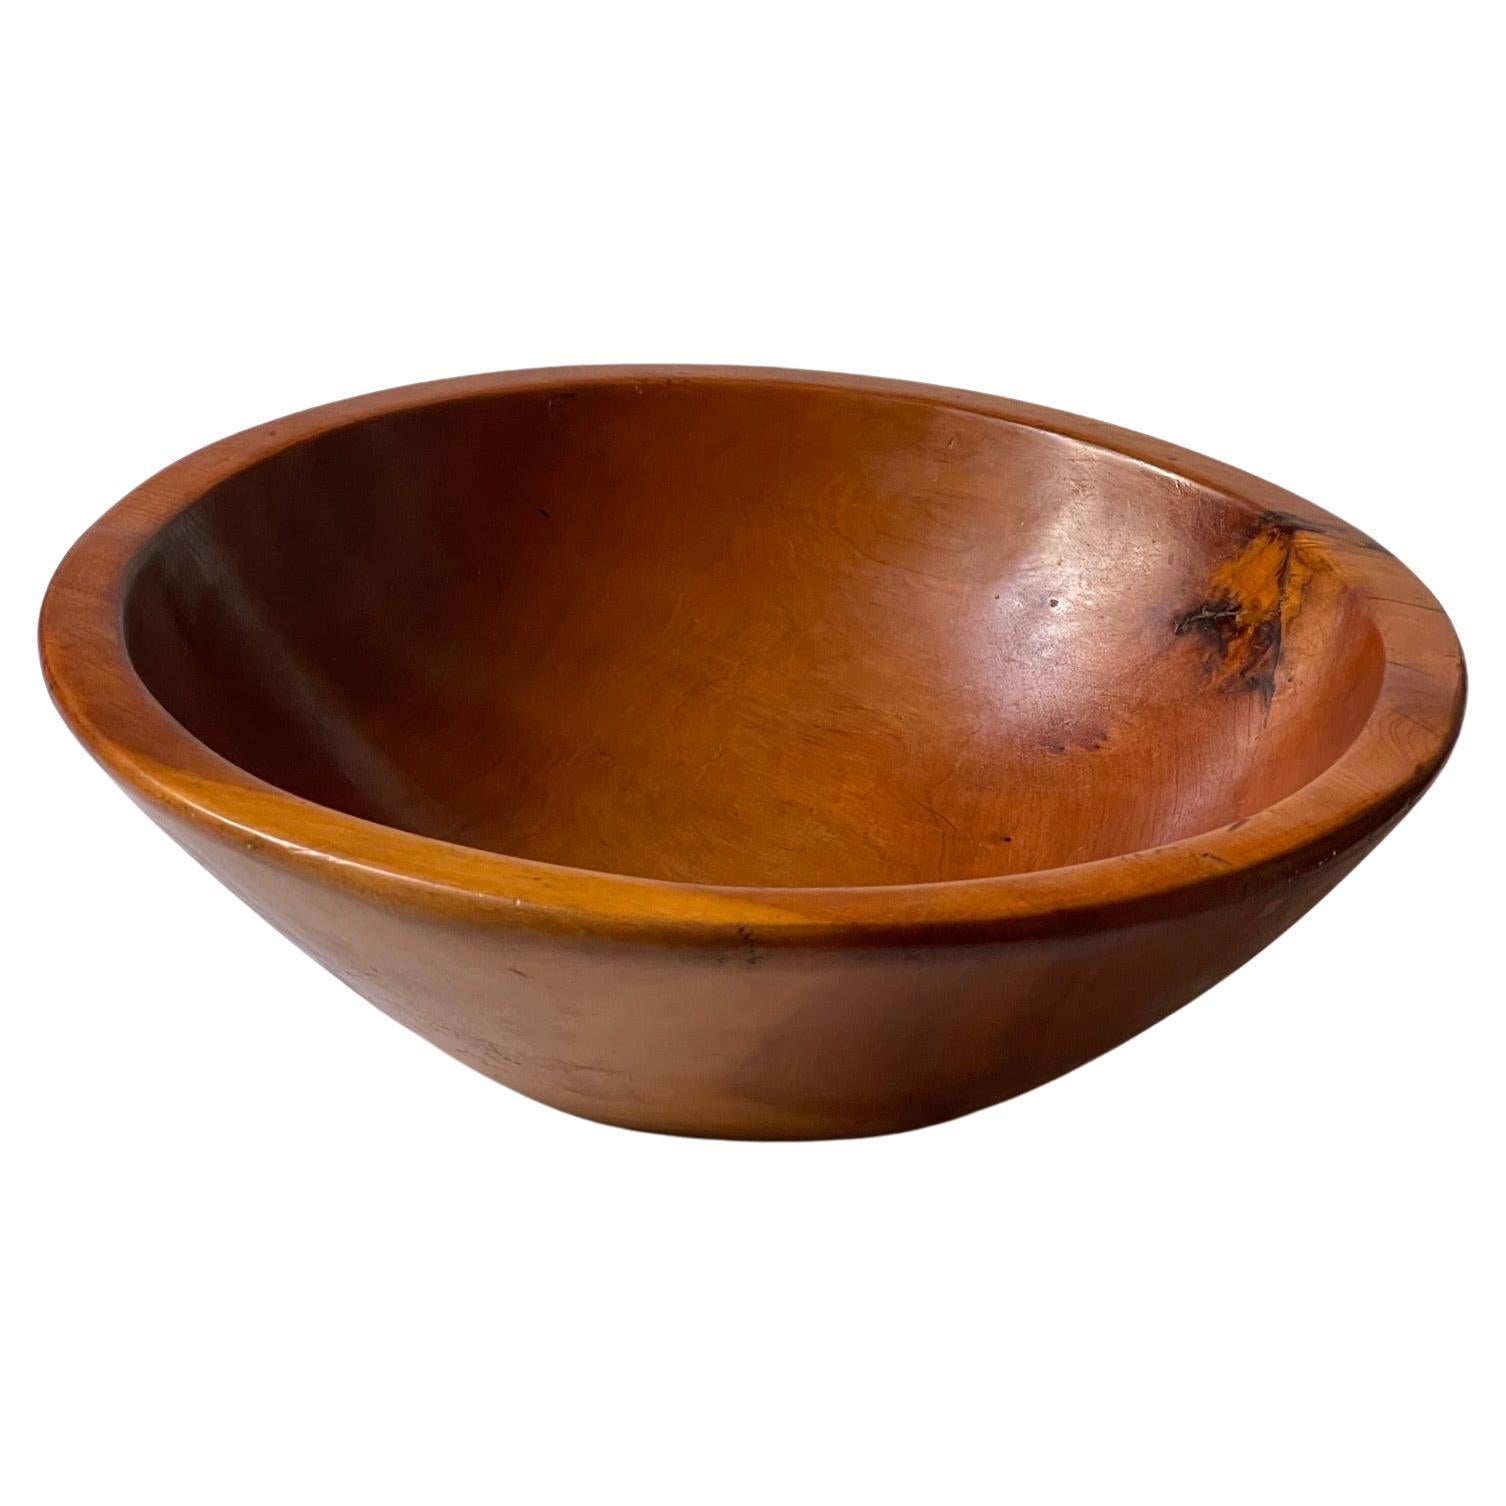 Early 20th century wooden bowl crafted in solid fruitwood by danish woodturner. For Sale